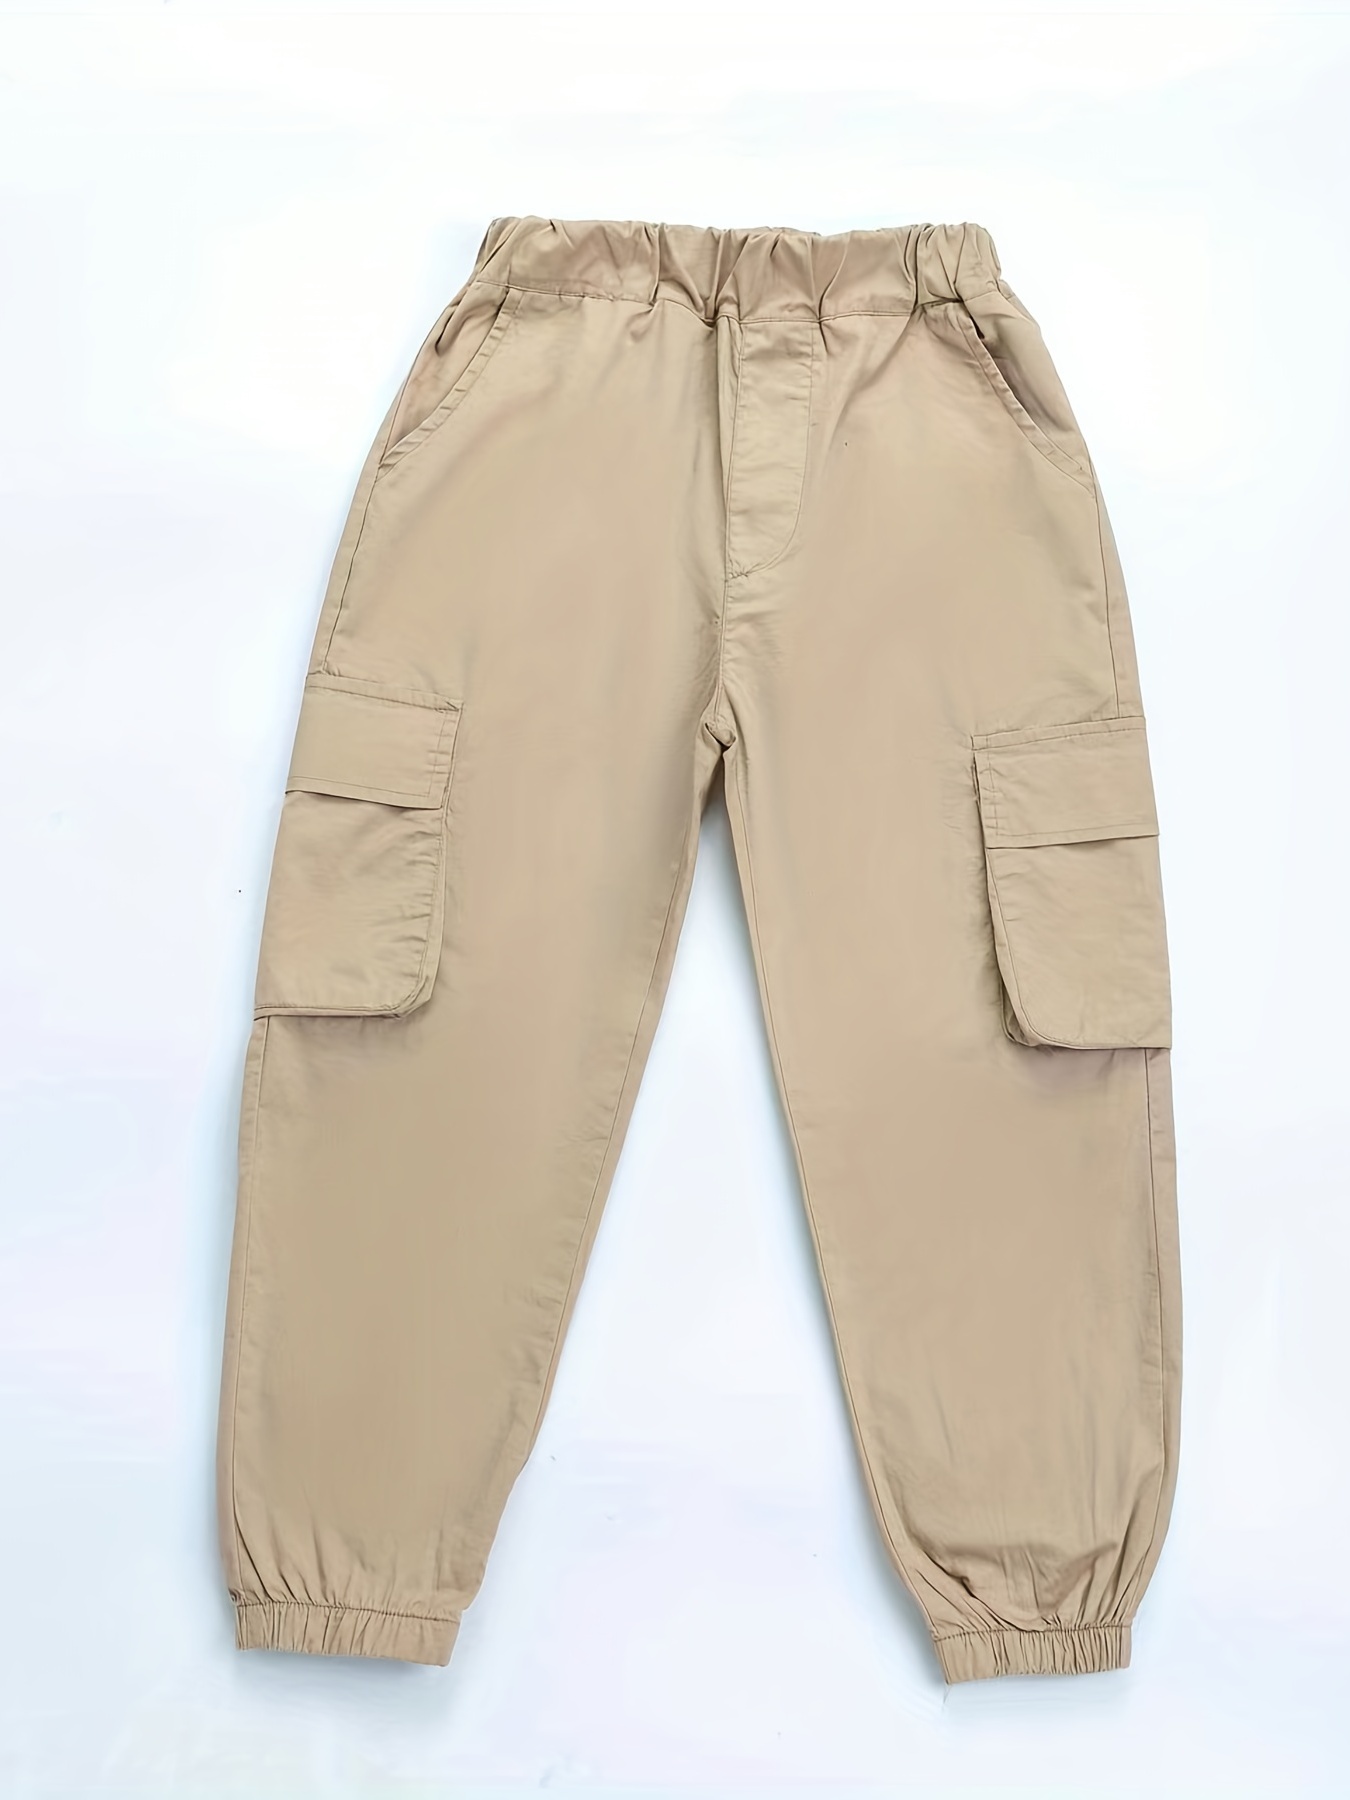 Shop Girls Utility Pants Online - Fast Shipping & Easy Returns